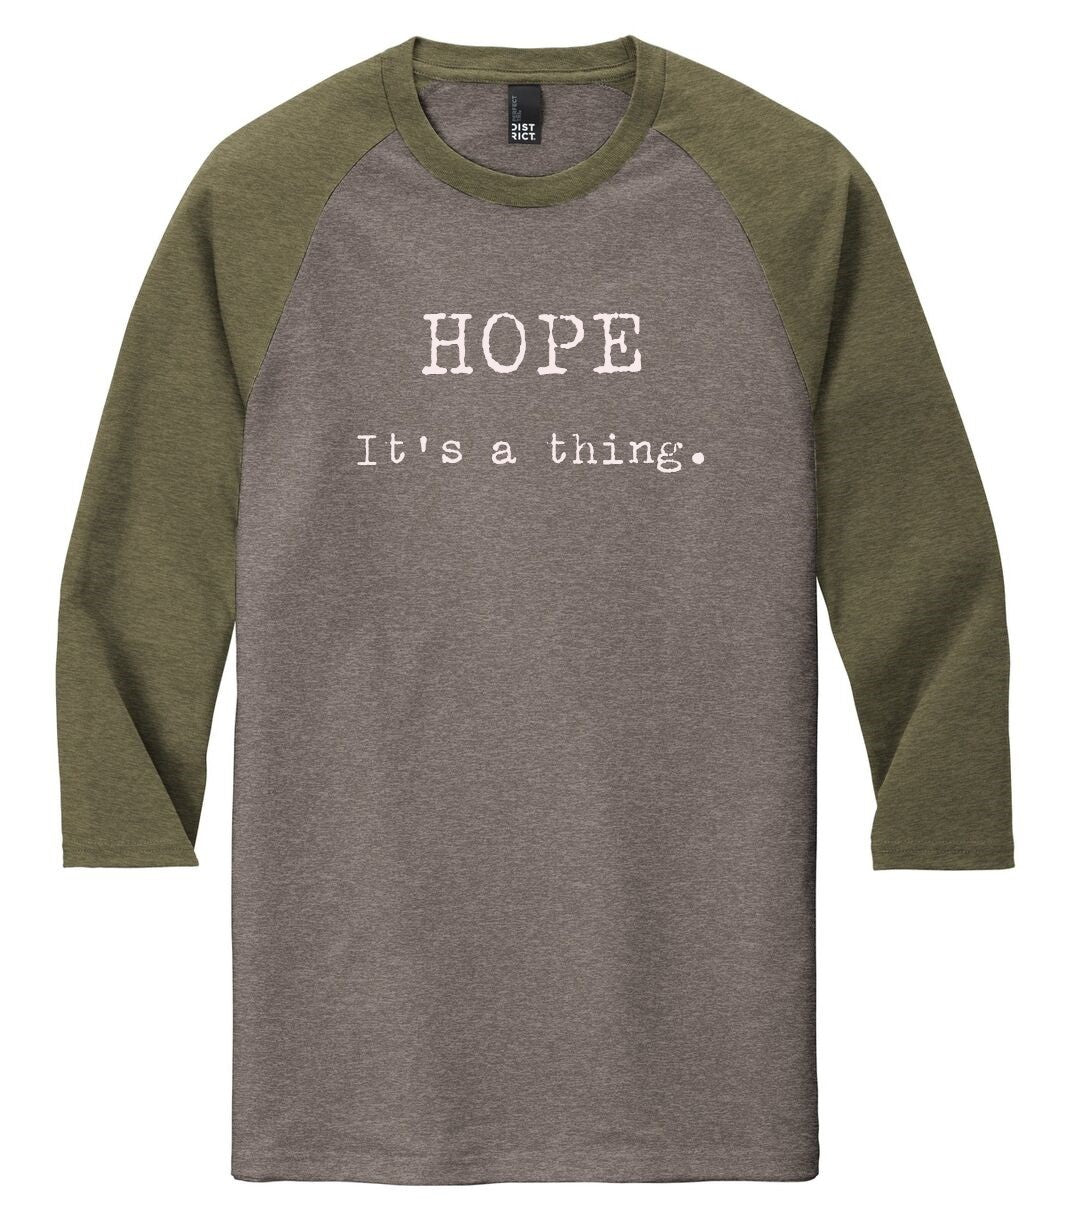 "Hope. It's a thing." 3/4 Sleeve Raglan Military Green/Gray Frost, Women's